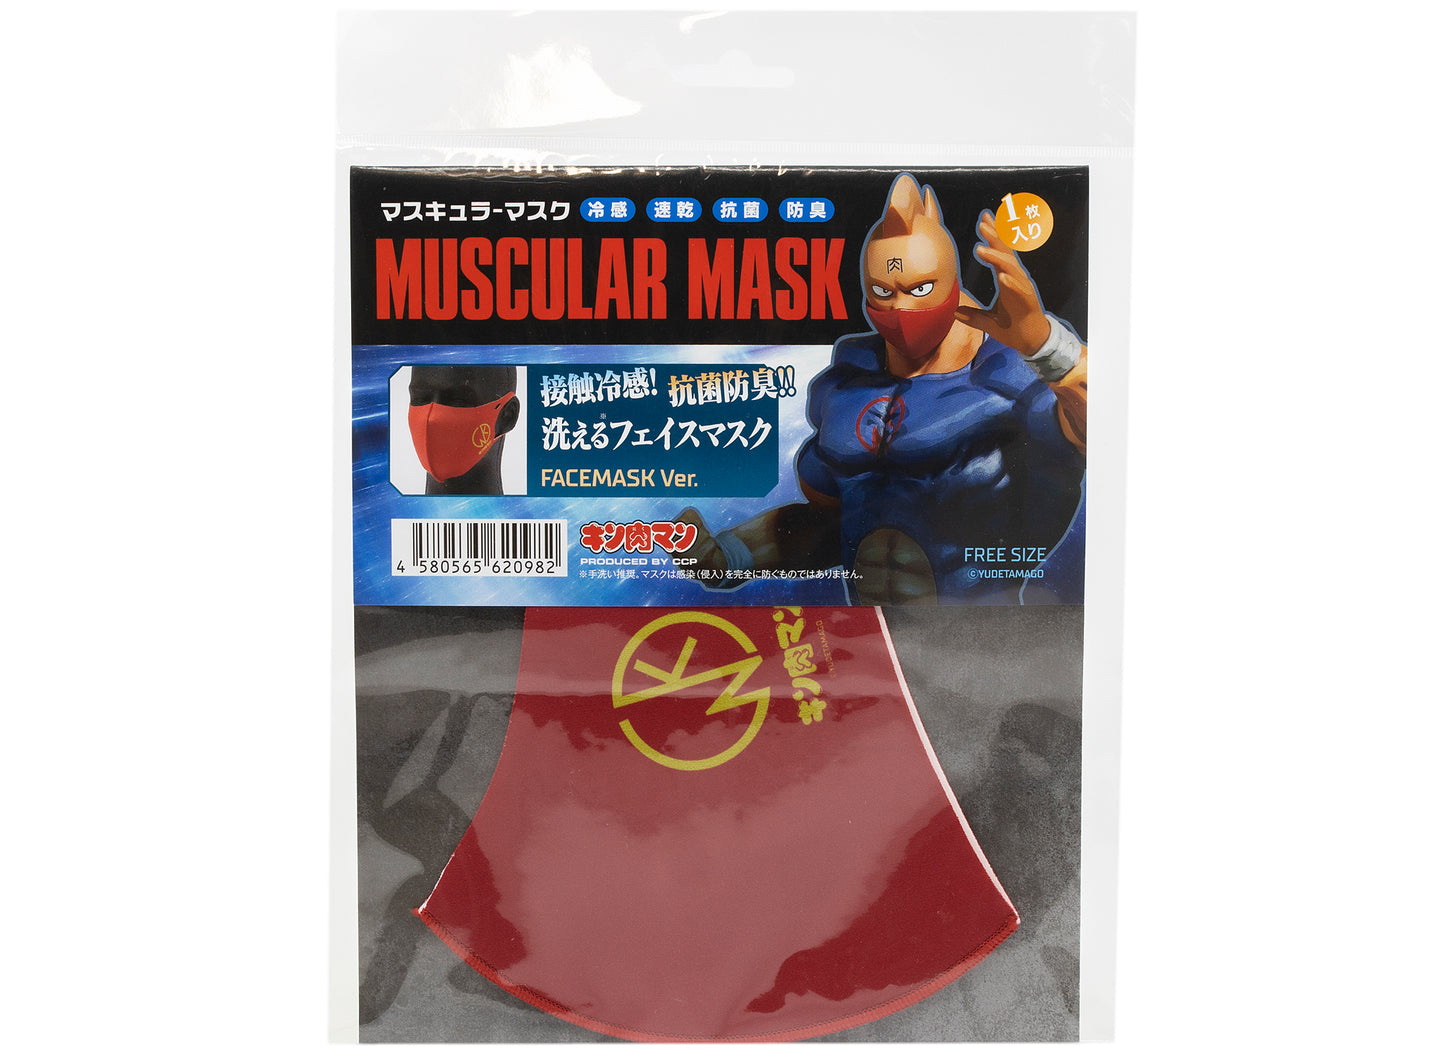 Medicom Toy Muscular Face Mask in Red